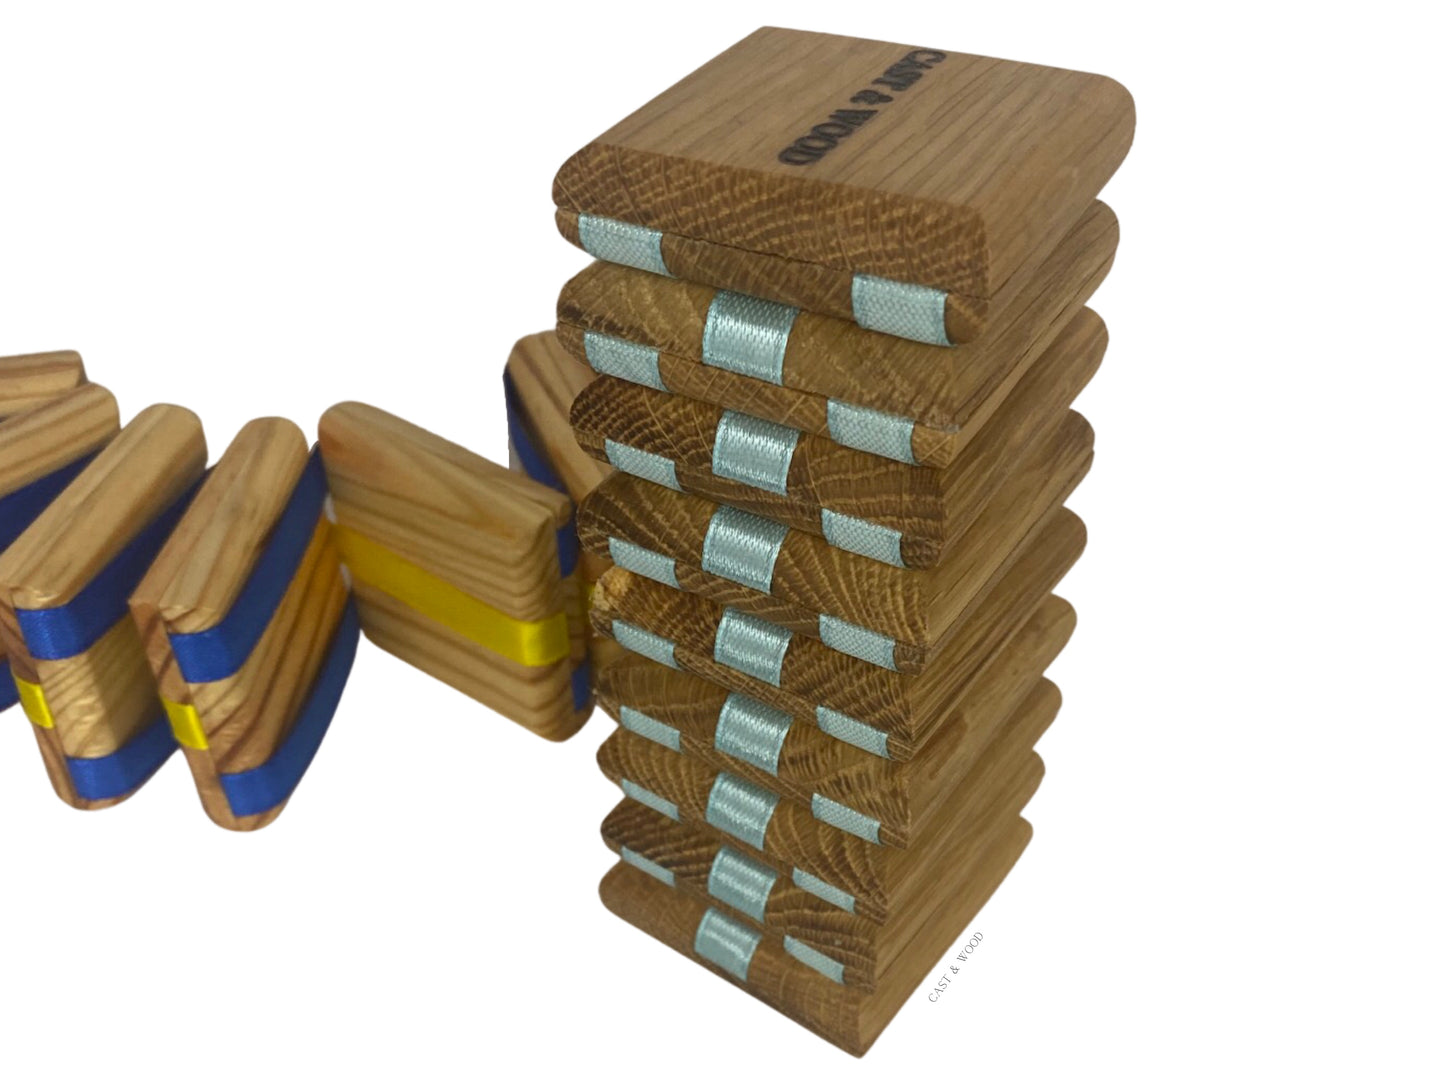 Jacobs Ladder Wooden Toy